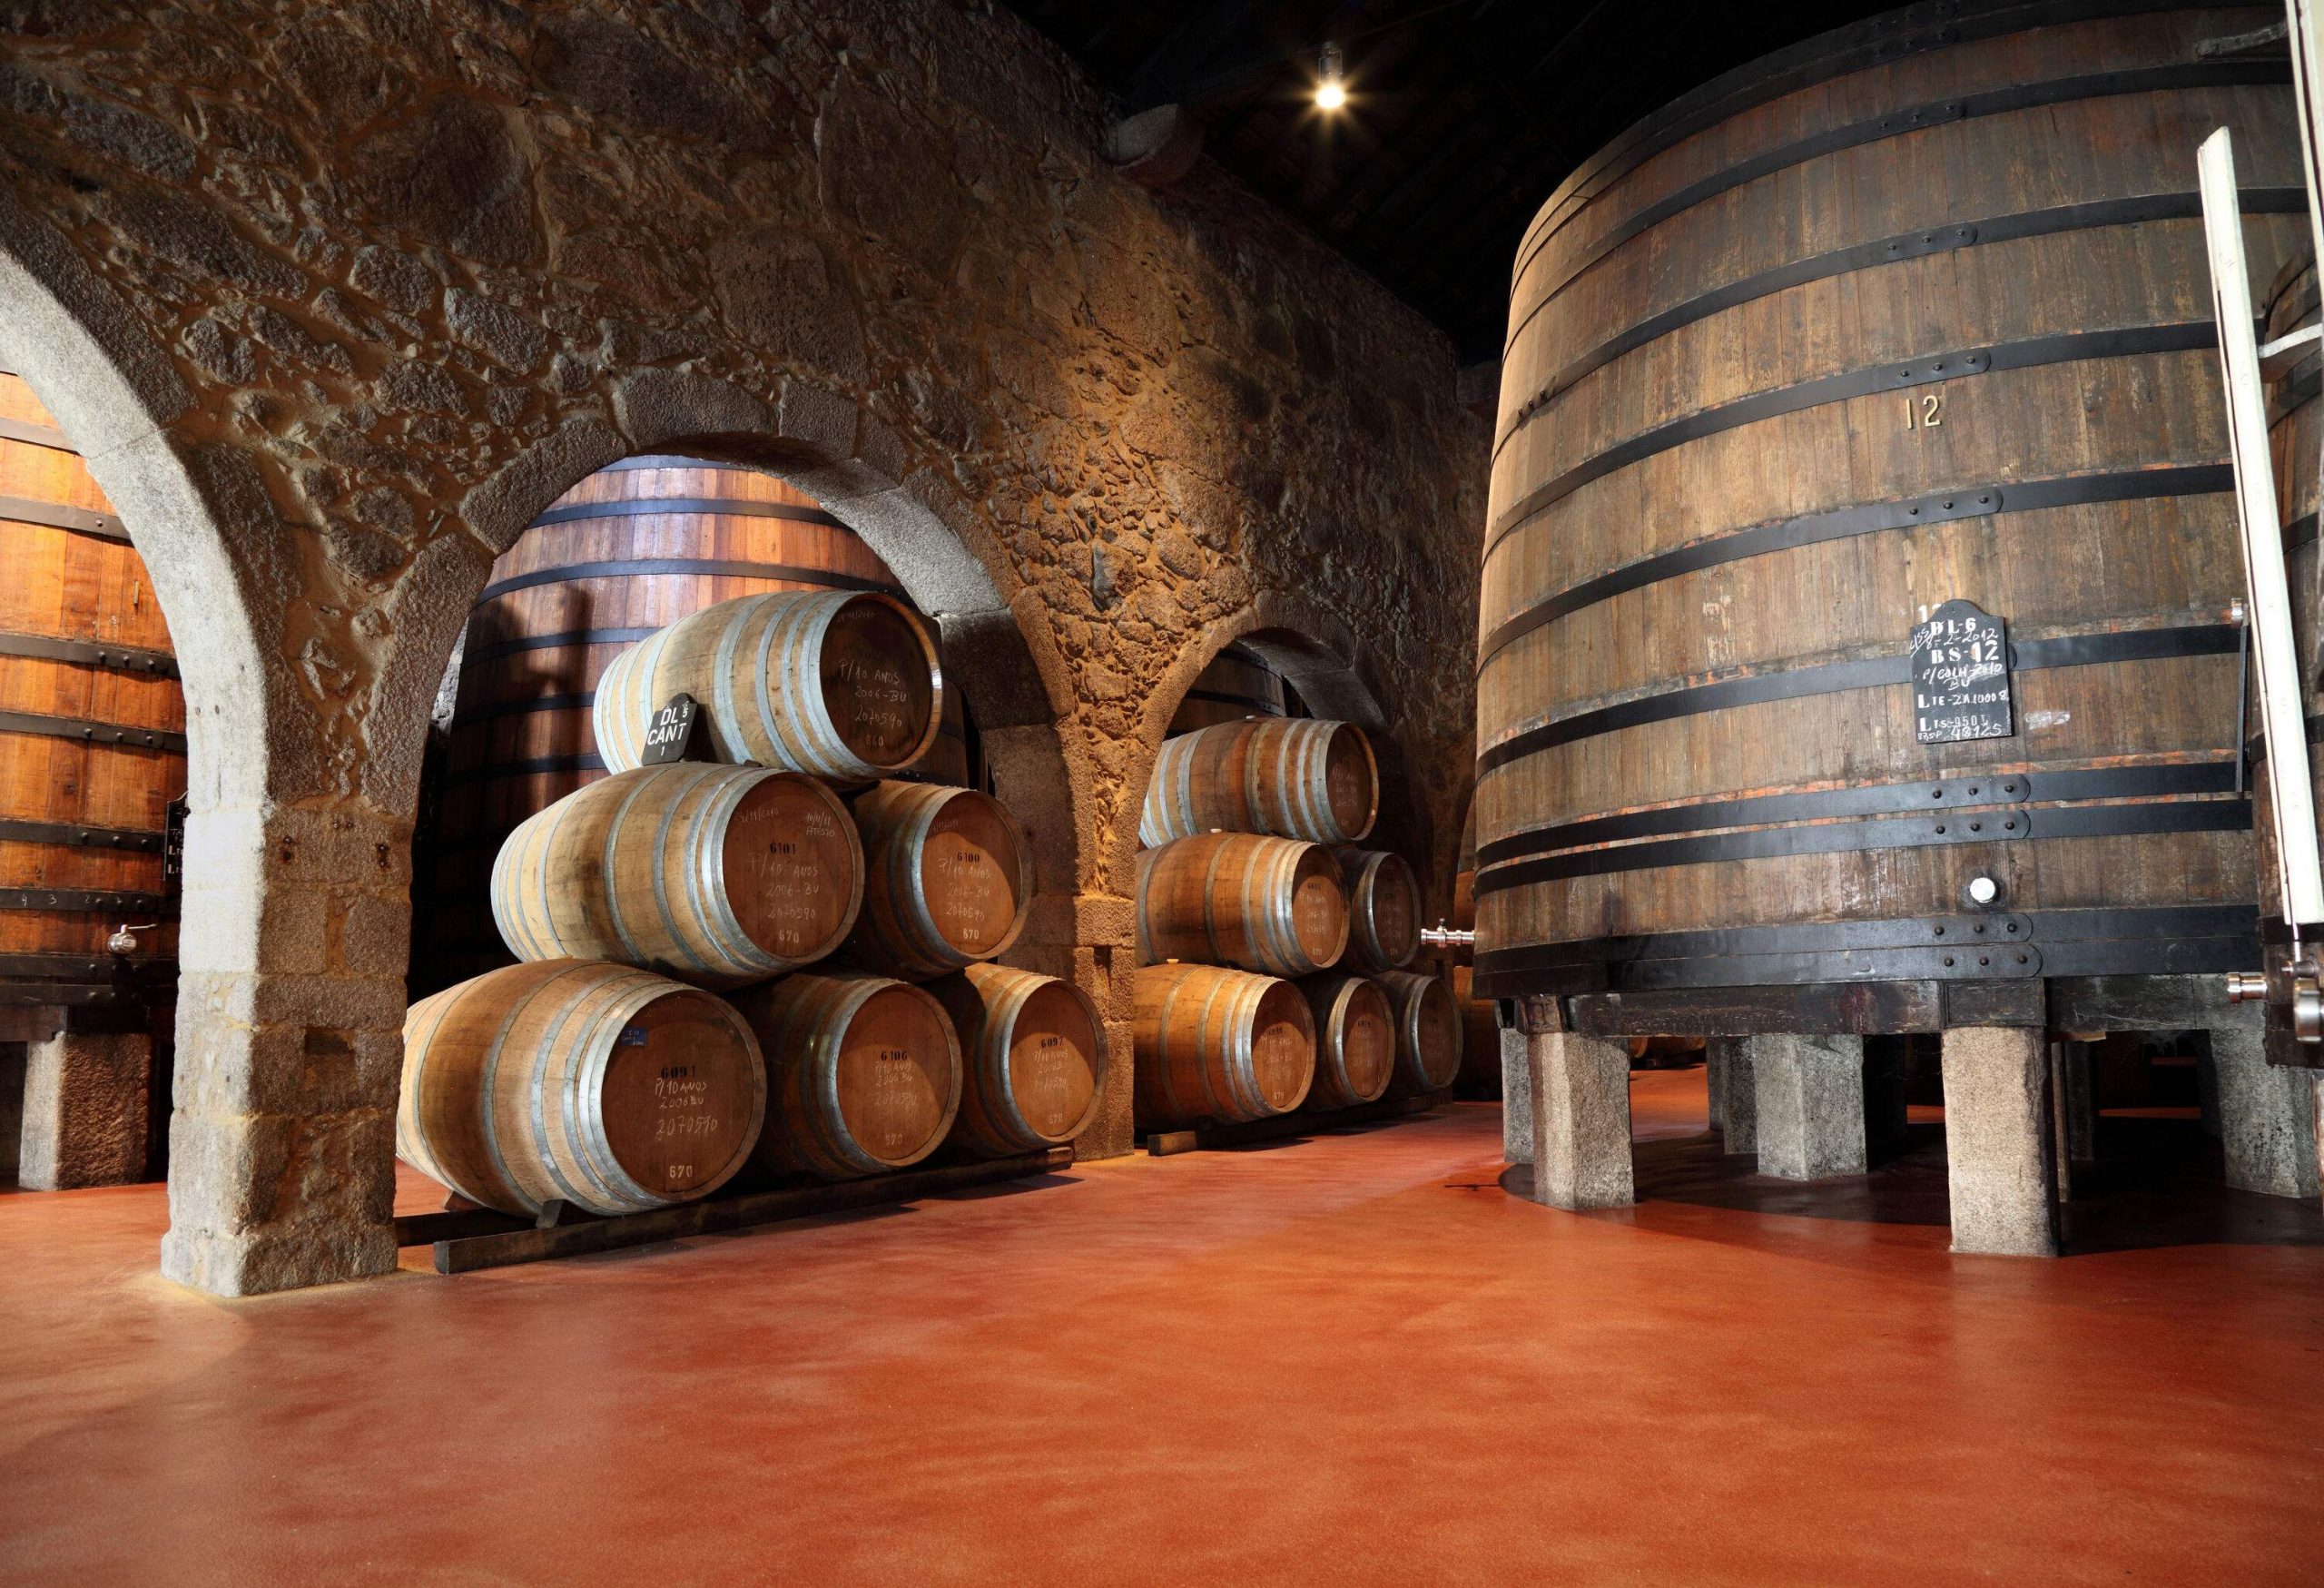 A stack of wooden barrels in a wine cellar.